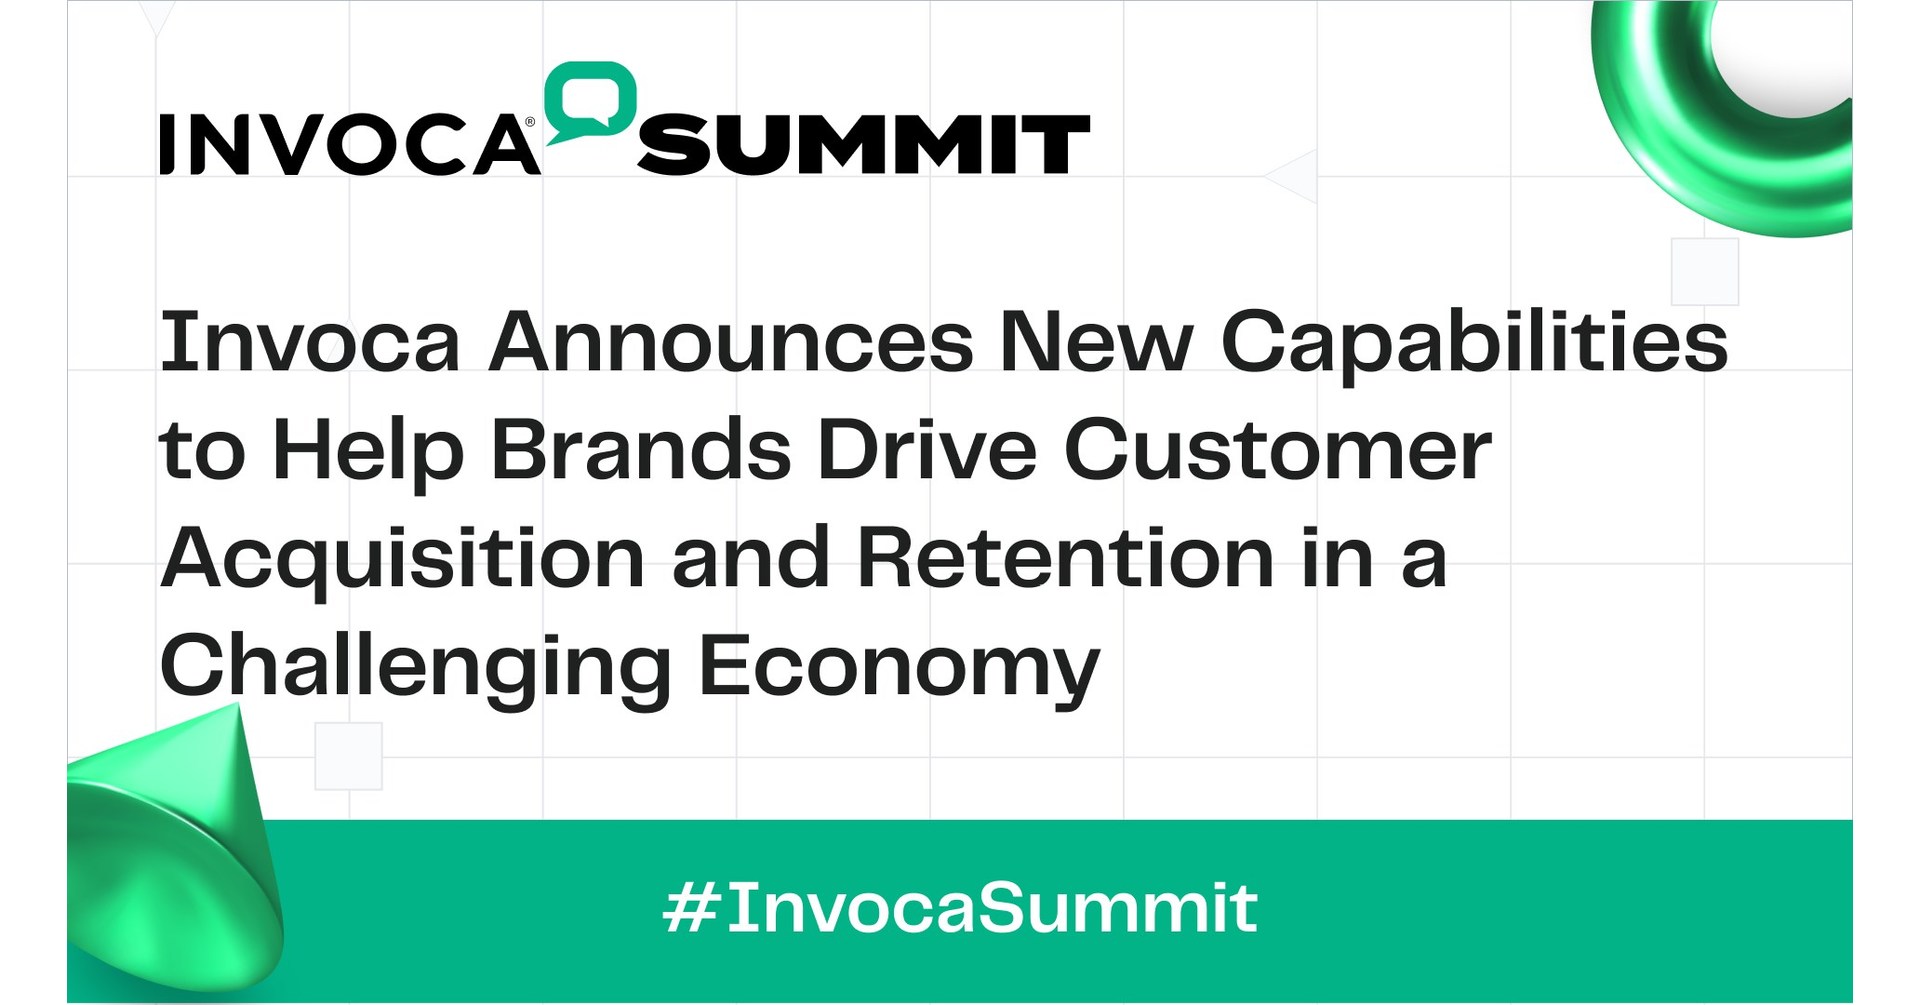 Invoca Announces New Capabilities to Help Brands Drive Customer Acquisition and Retention in a Challenging Economy